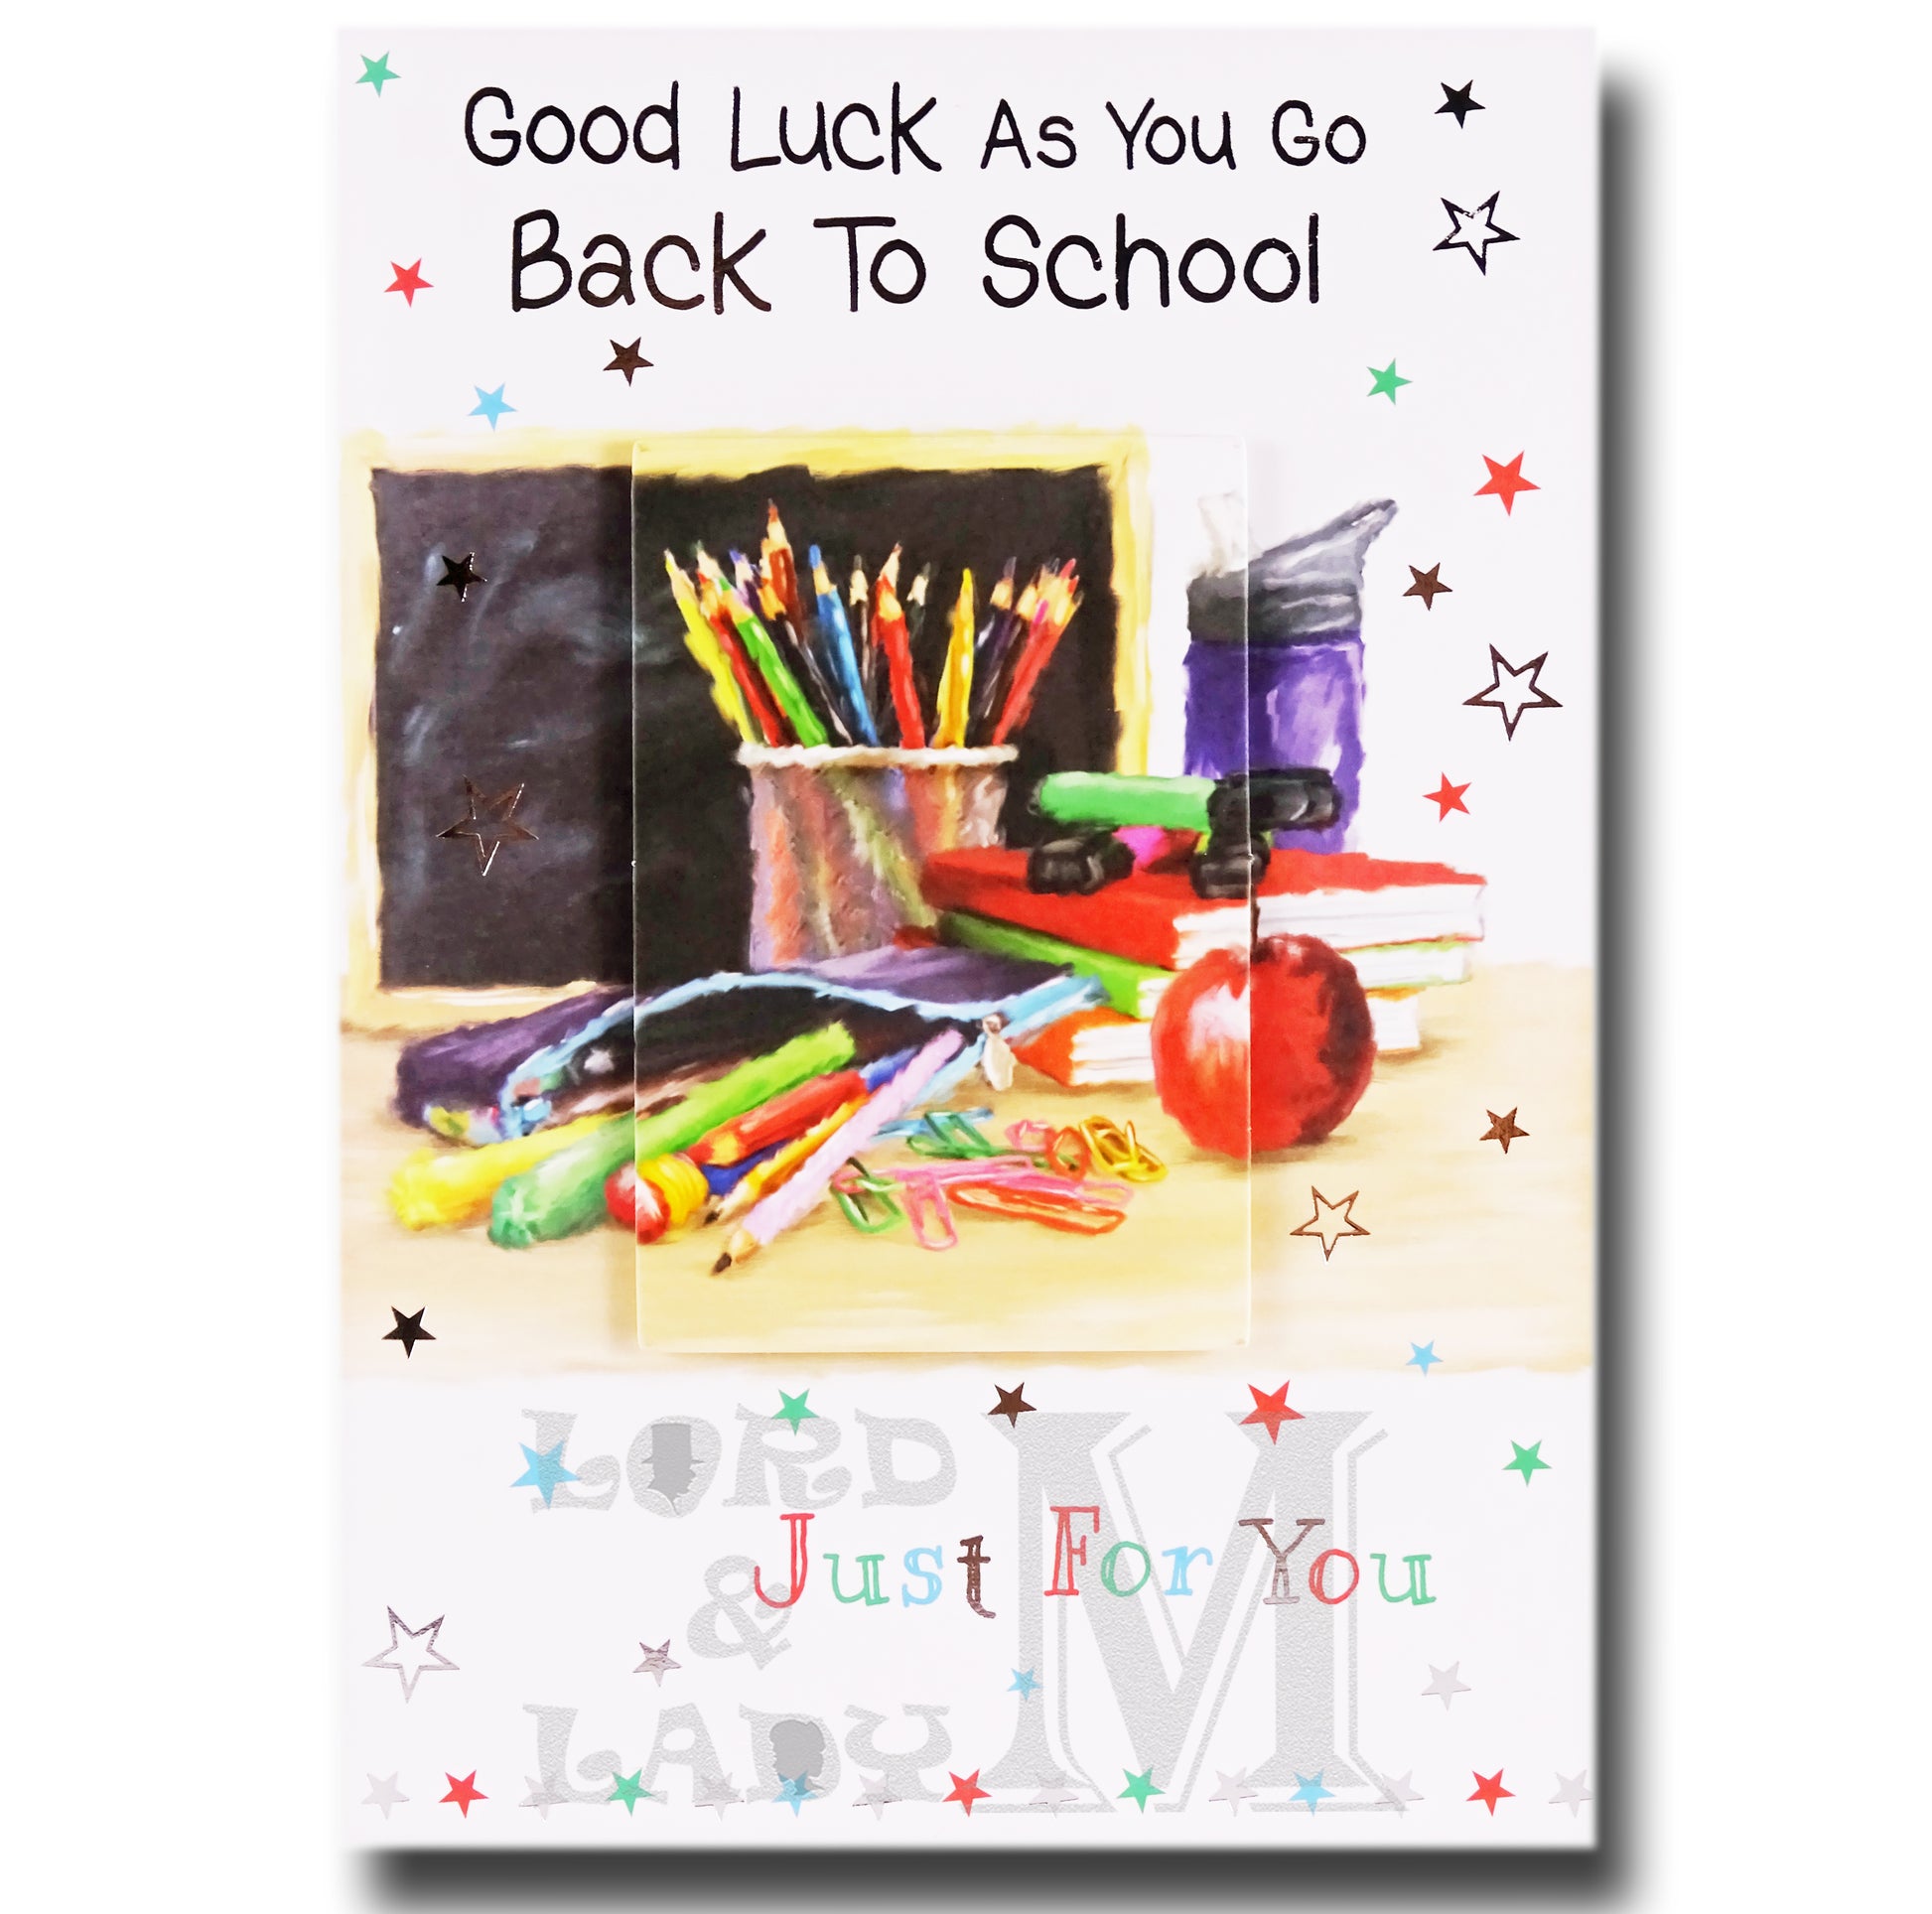 19cm - Good Luck As You Go Back To School - BGC